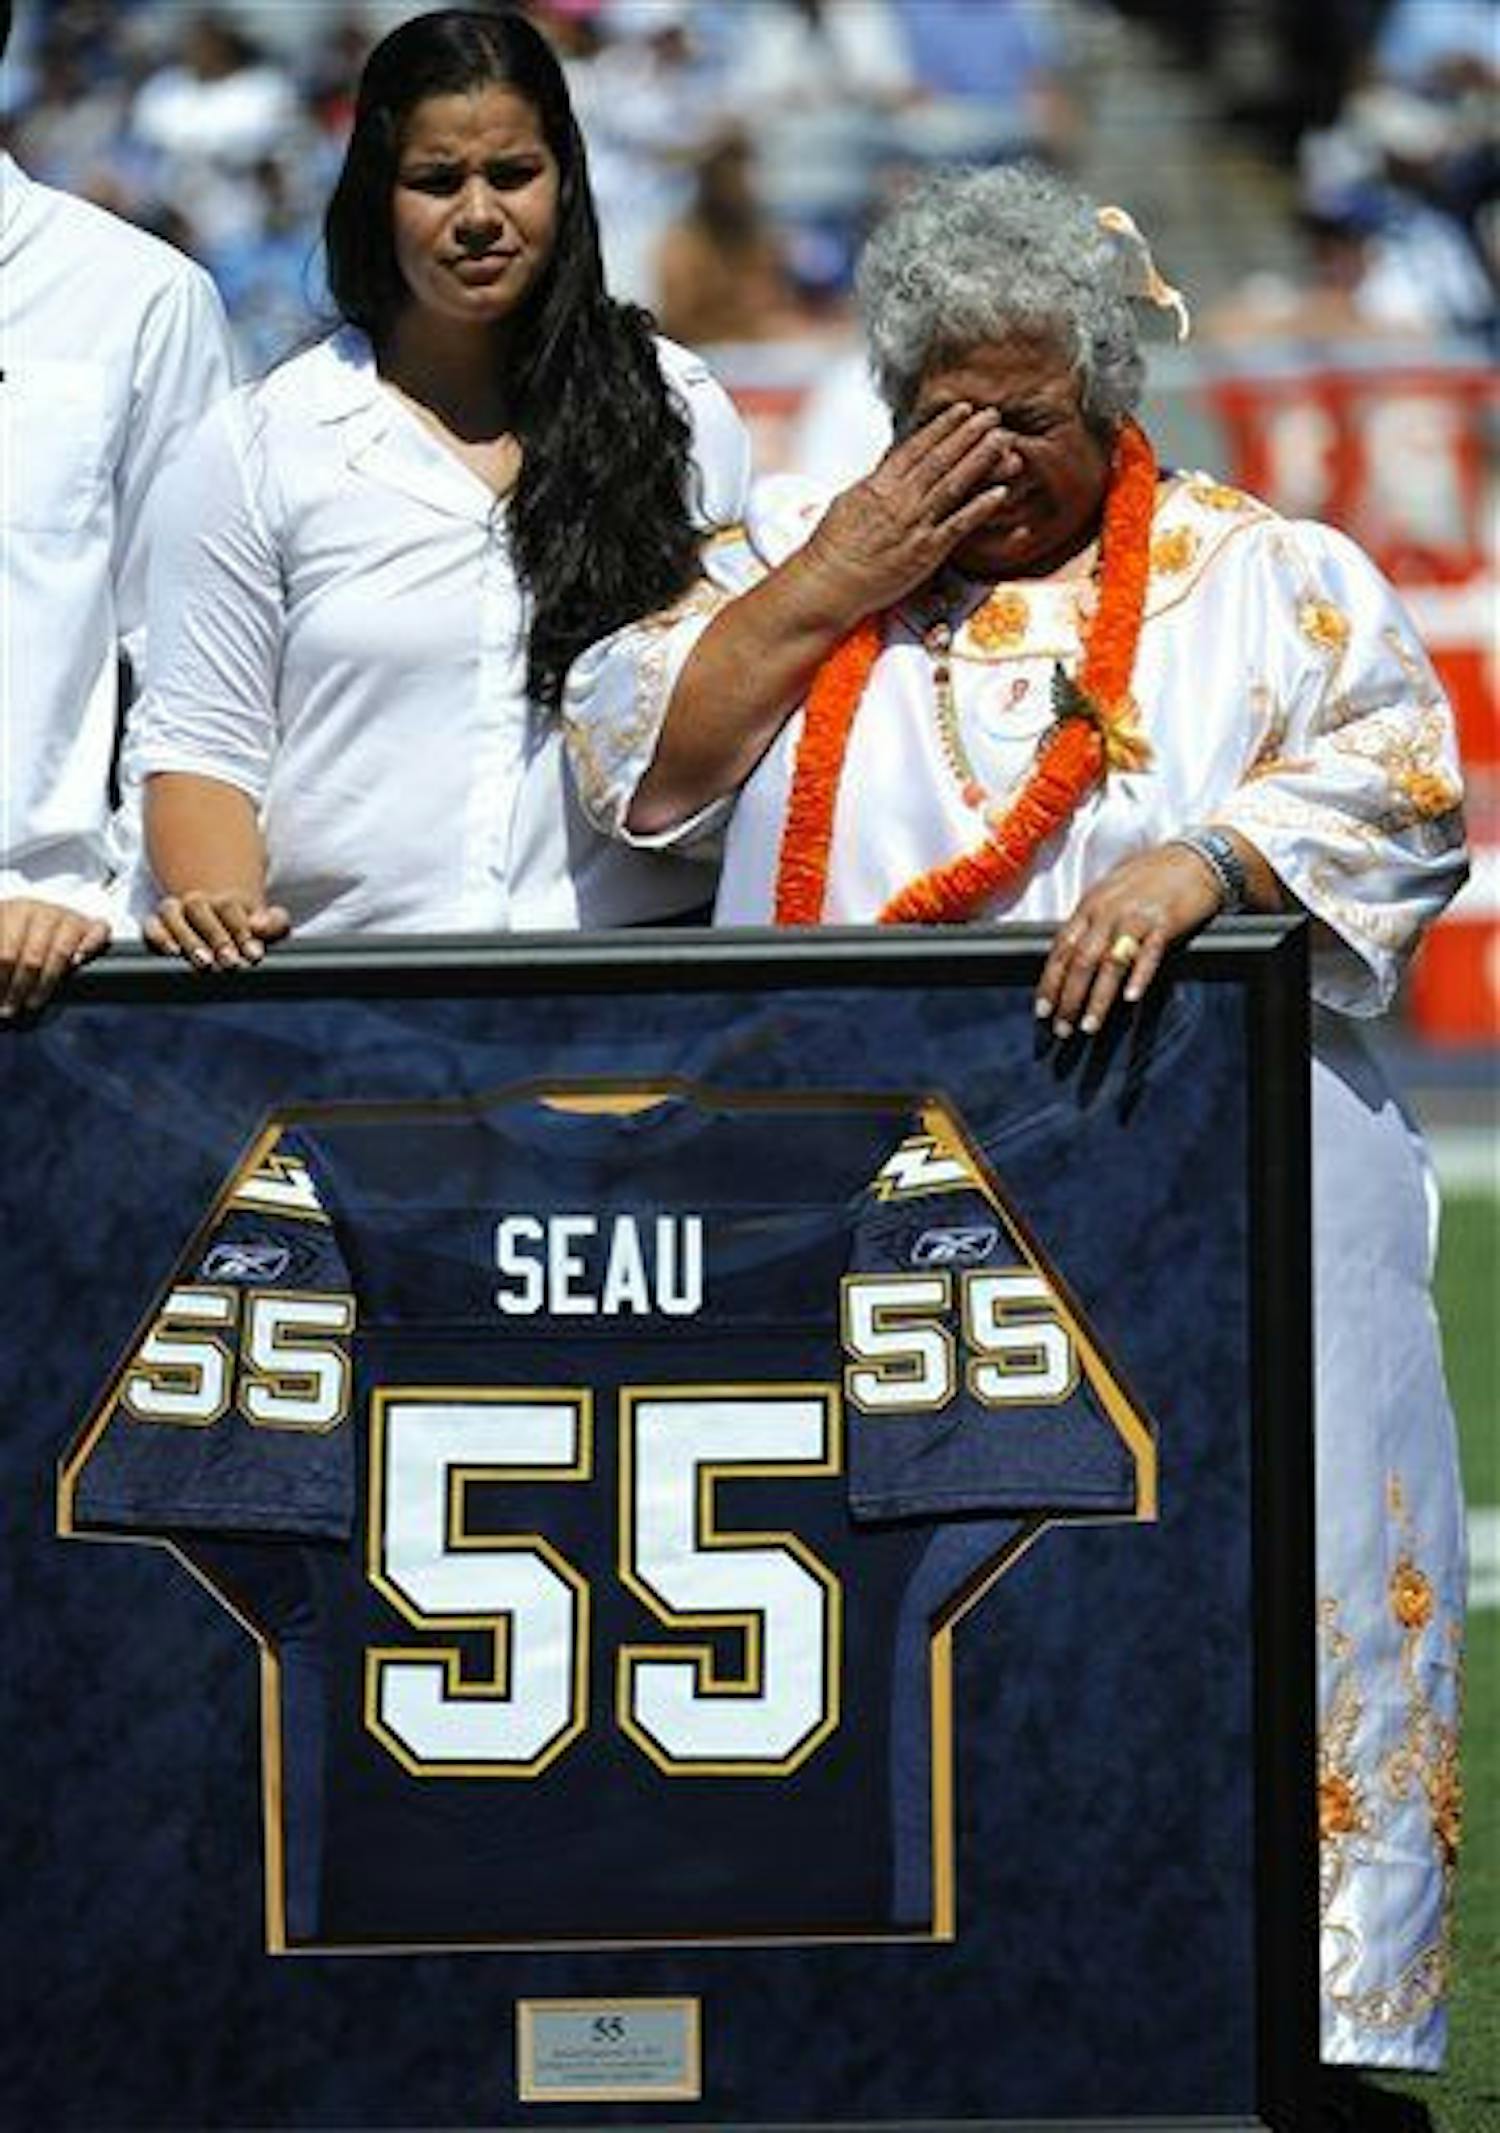 Luisa Seau, right, the mother of former San Diego Chargers linebacker Junior Seau, wipes her eyes during a ceremony on&nbsp;Sept. 16, 2012,&nbsp;to retire Seau's No. 55 uniform before the Chargers play the Tennessee Titans in an NFL football game in San Diego.